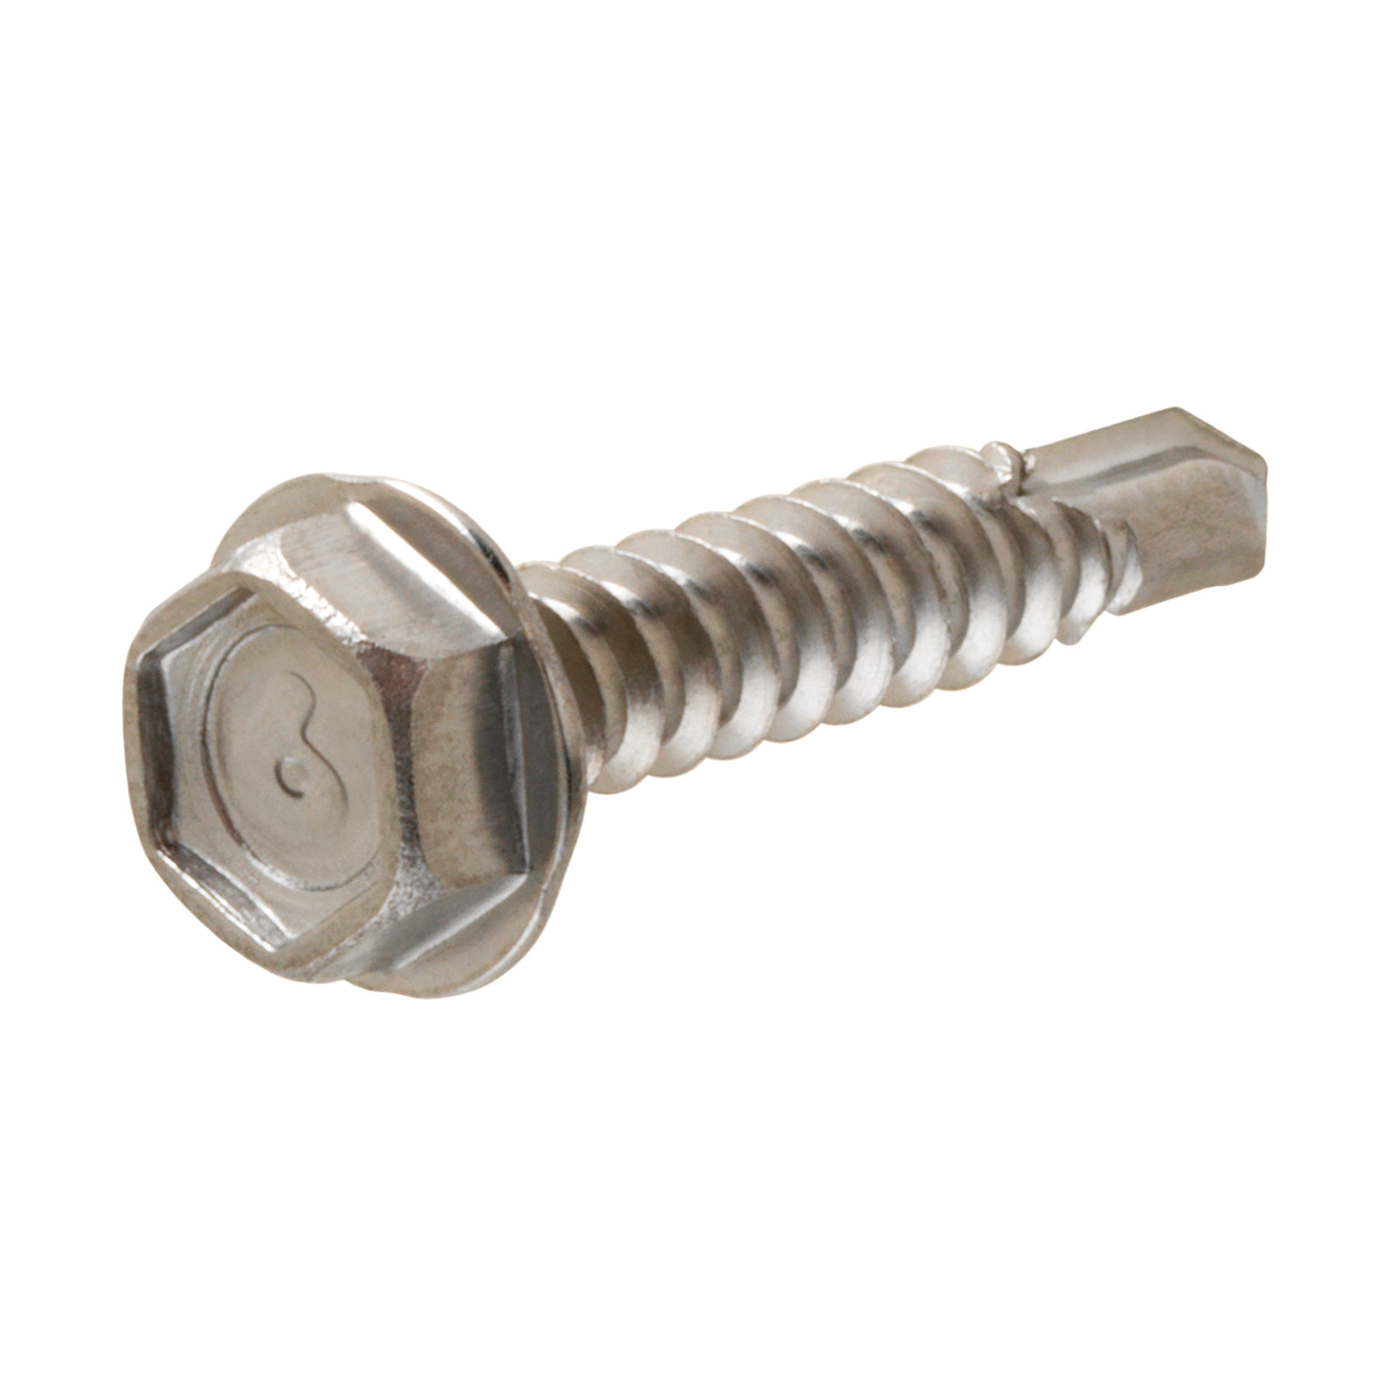 881842 Screw, #12 Thread, 1 in L, Coarse Thread, Washer Head, Hex Drive, Self-Drilling Point, Stainless Steel